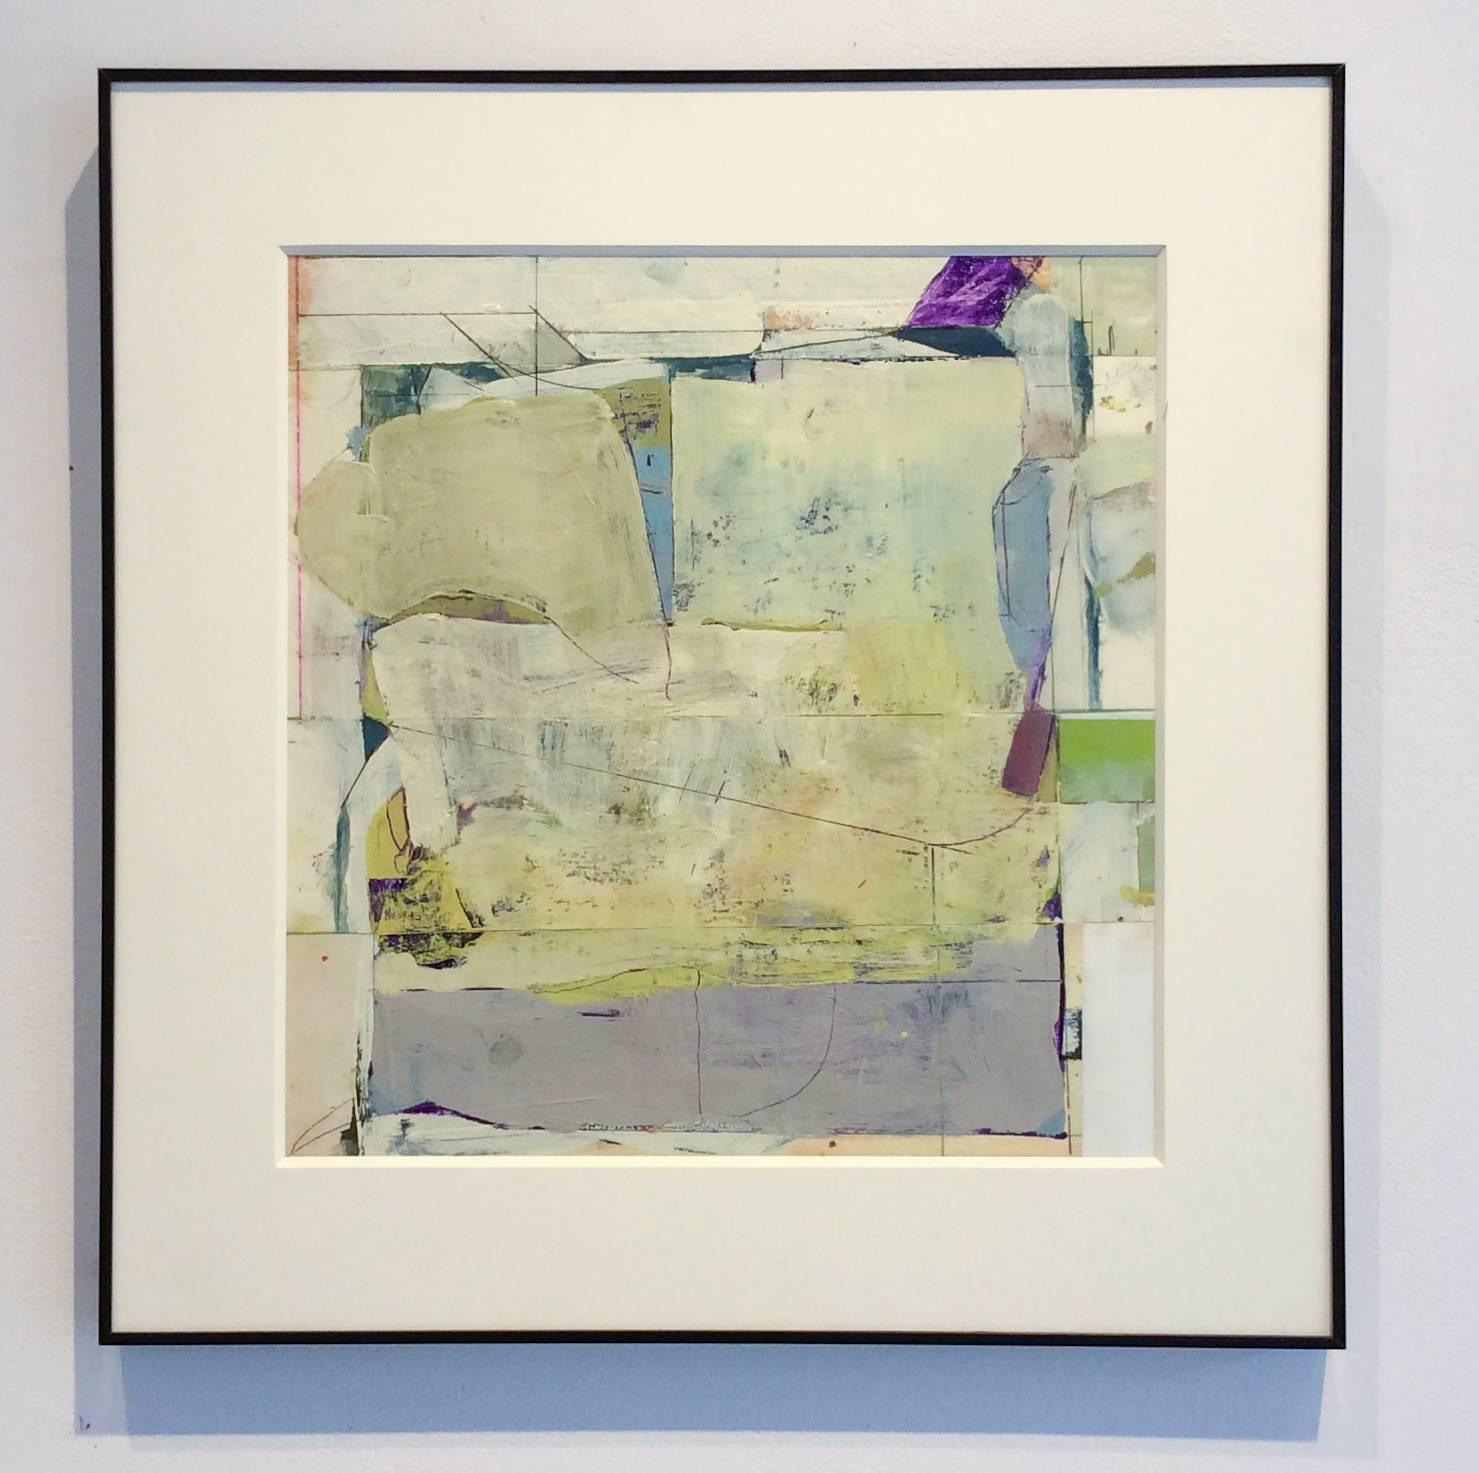 Mixed media on paper
18.75 x 18.75 inches framed
13 x 13 inches unframed

James O'Shea has been praised for years for his work as a colorist.
His expert handling of gouache produces layer upon layer of transparent color to create compositions that